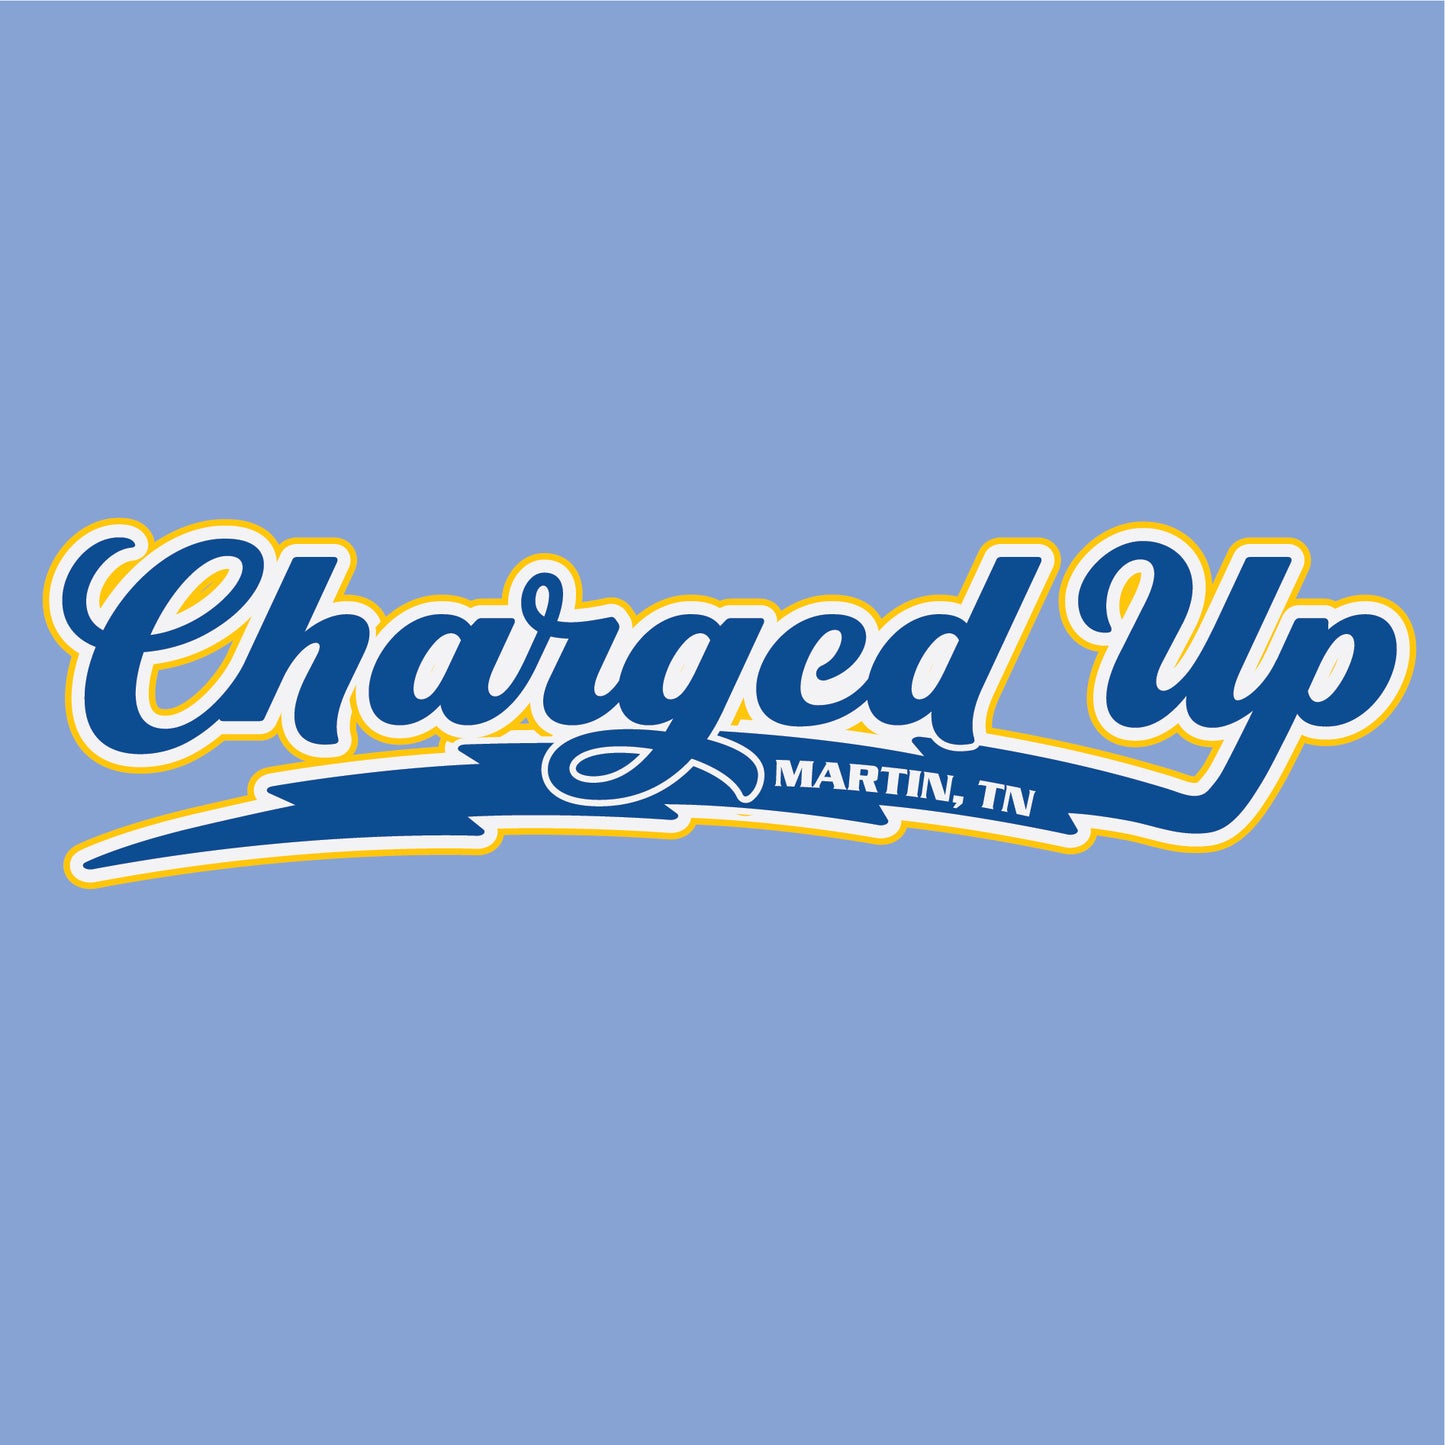 Charged Up Vintage Chargers T-shirt